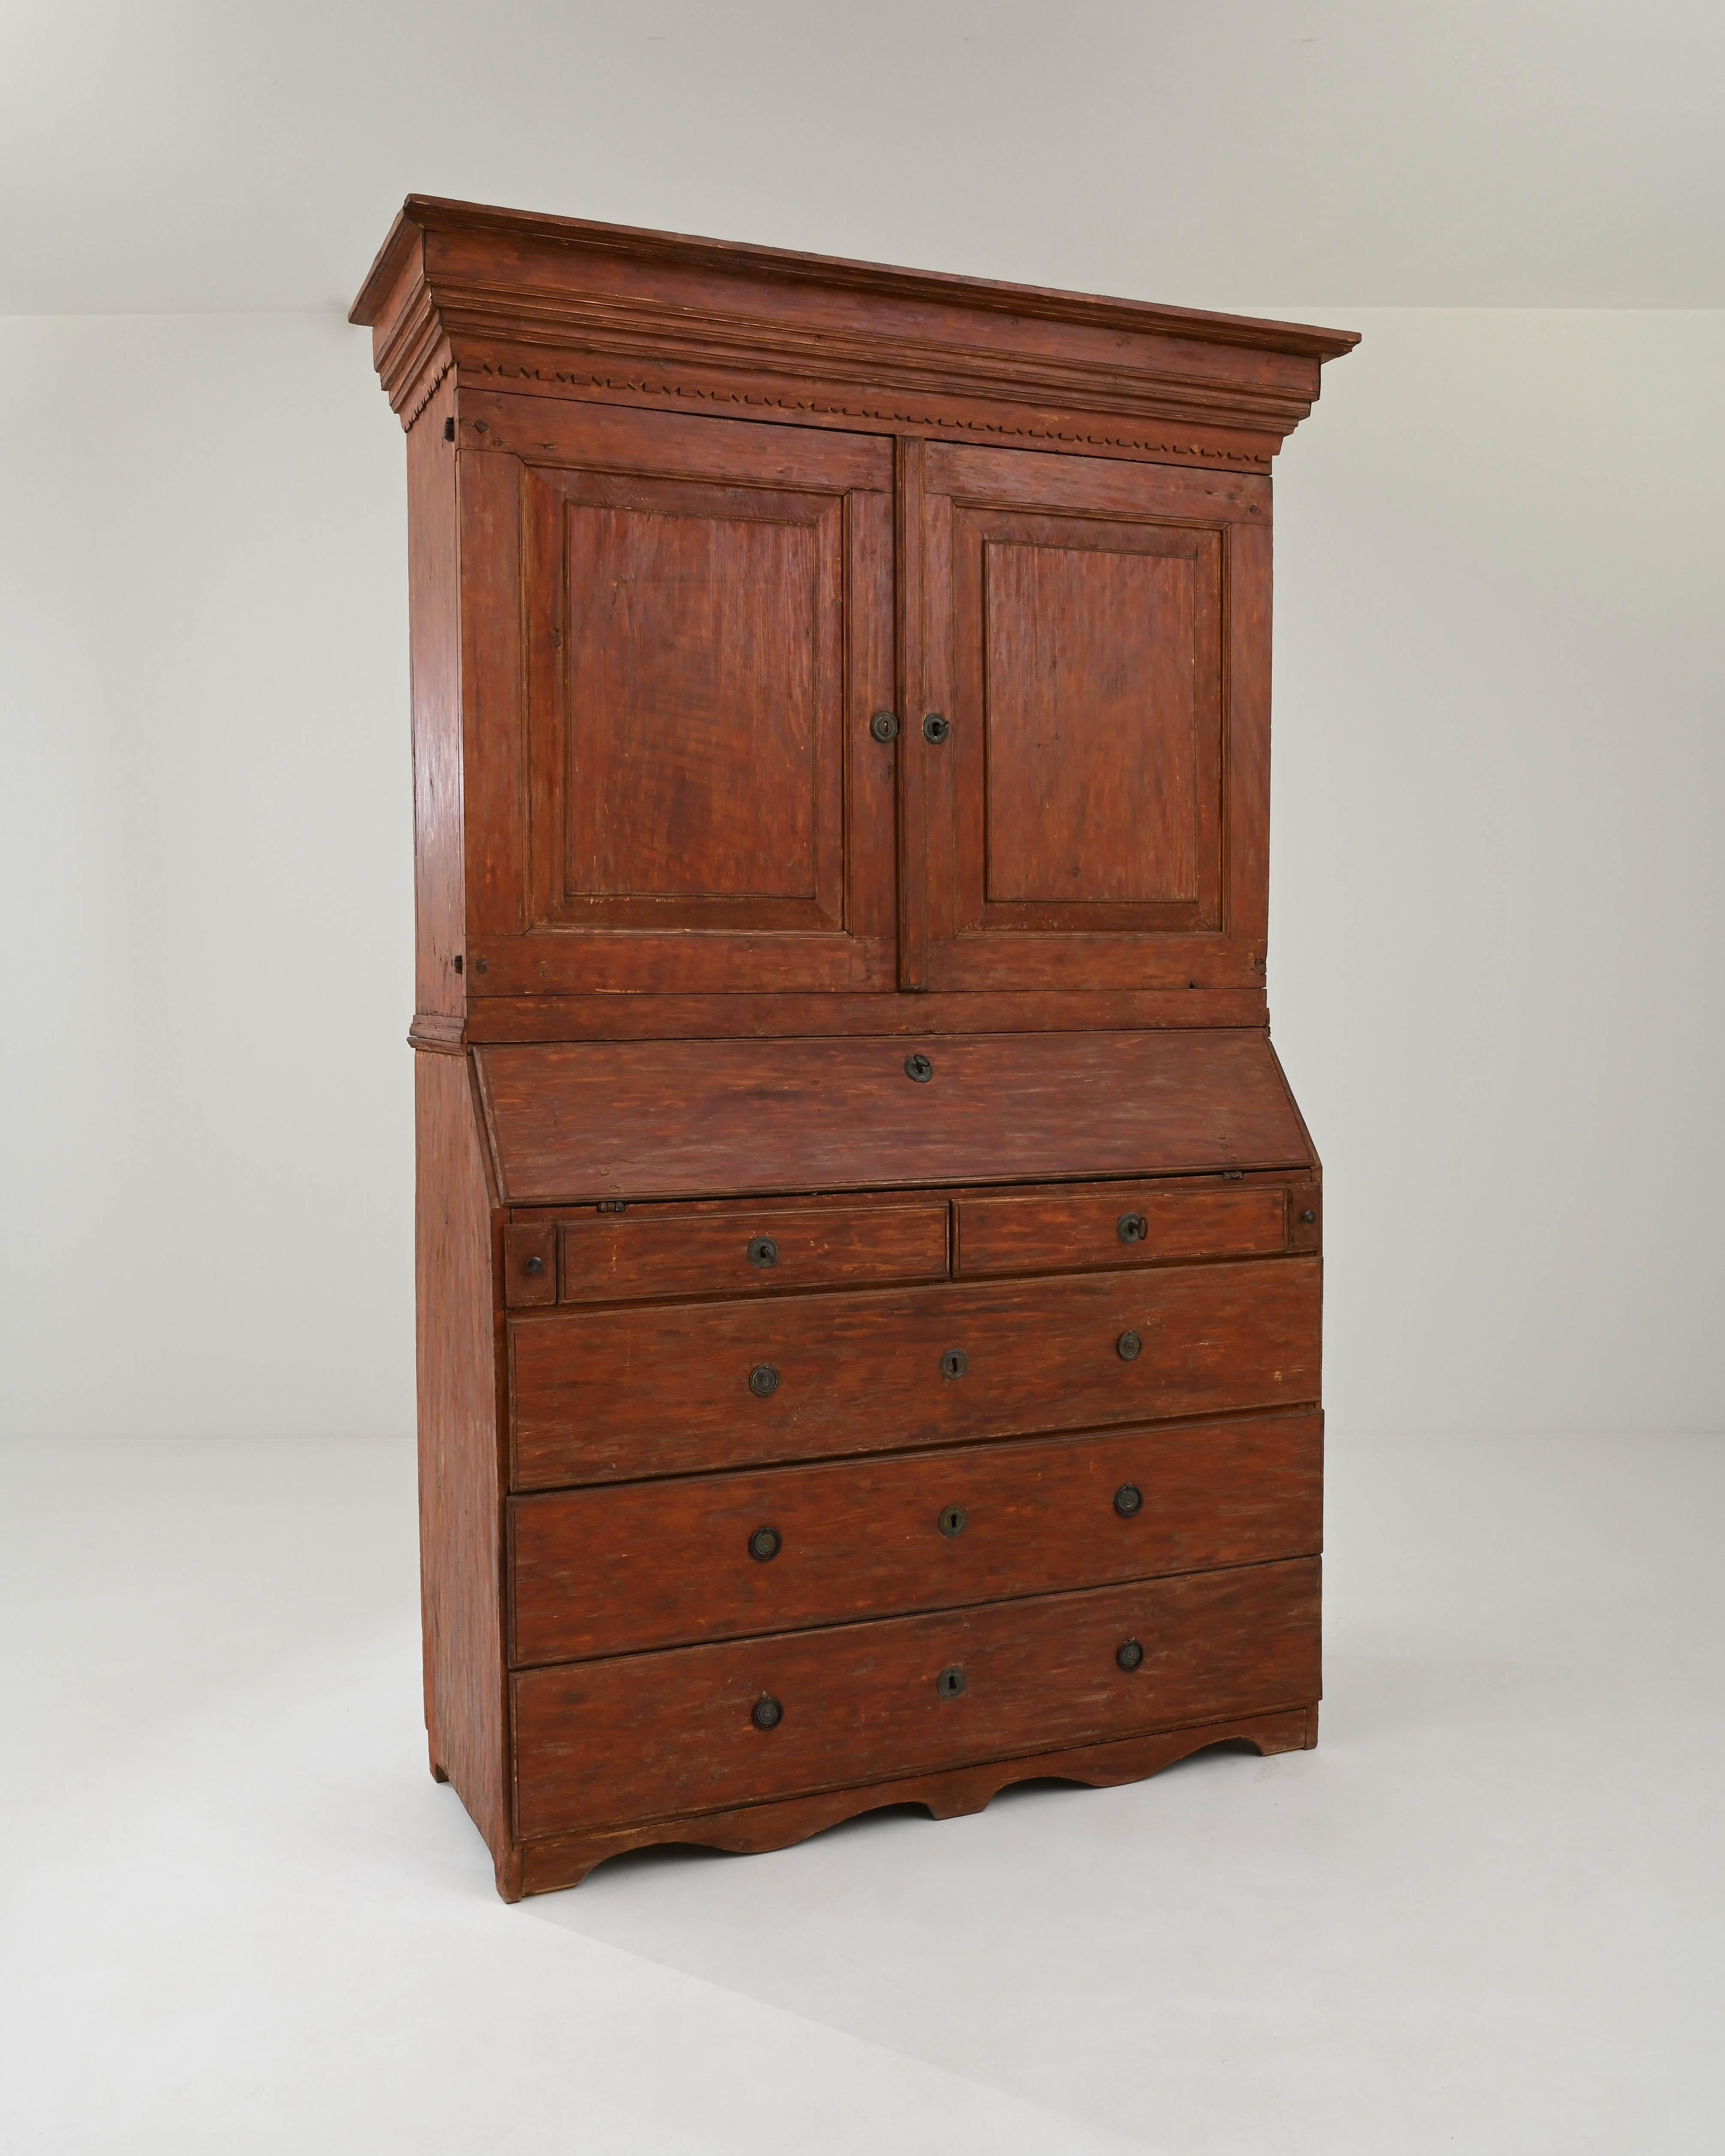 Early 19th Century 1820s Swedish Wooden Desk For Sale